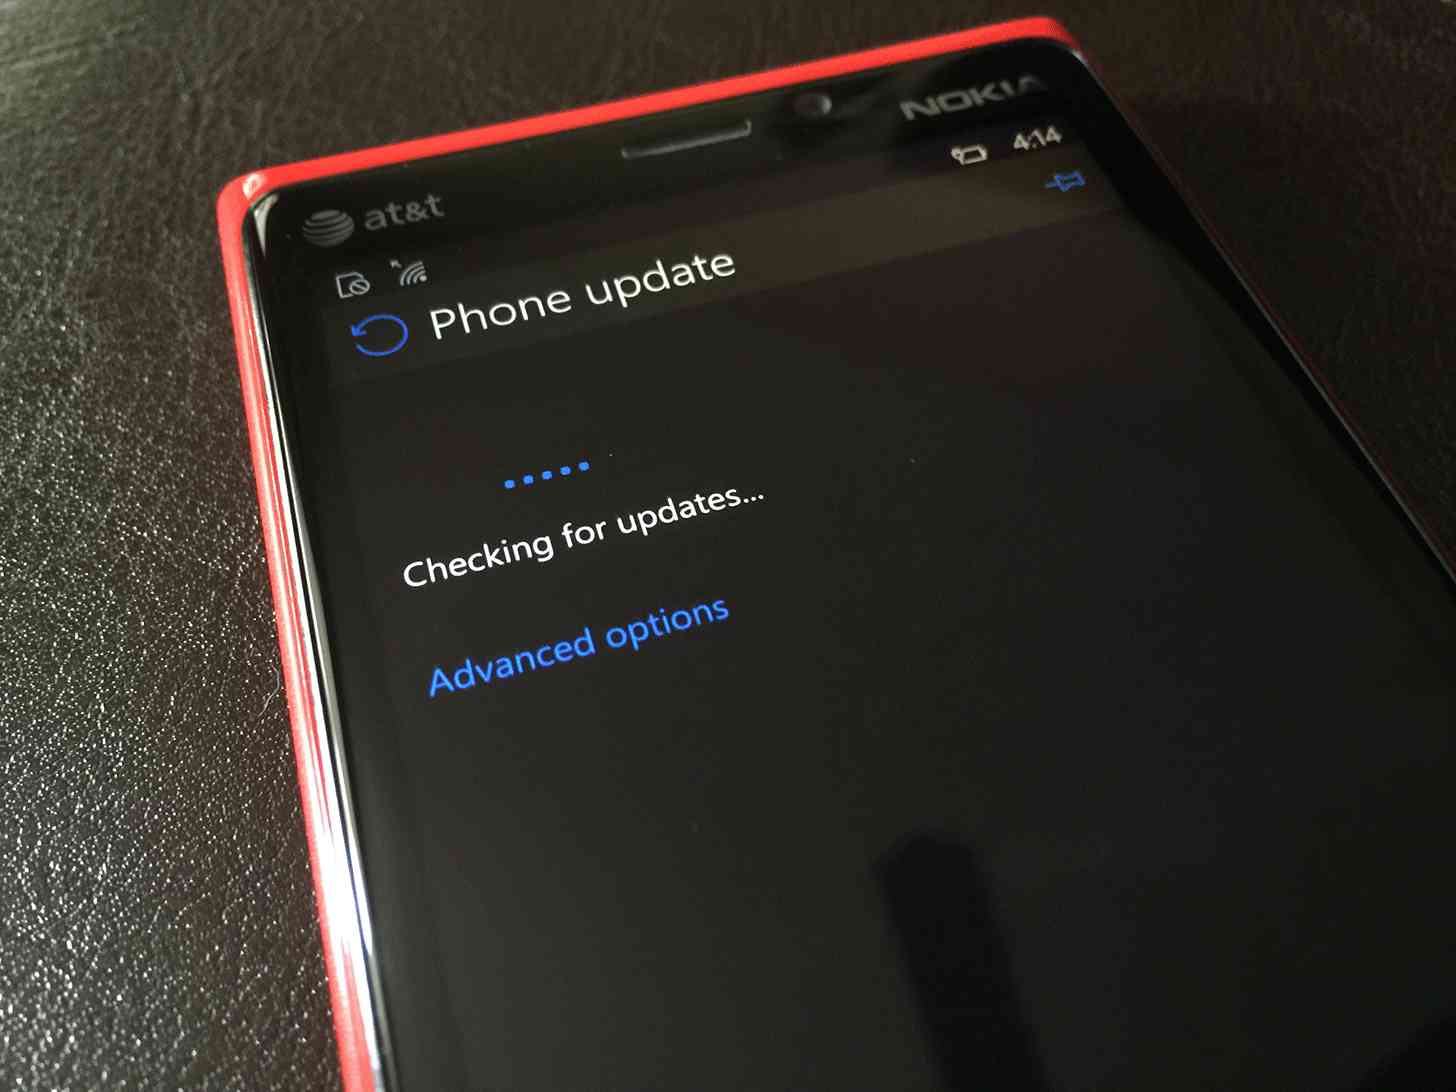 Windows 10 Mobile Insider Preview update